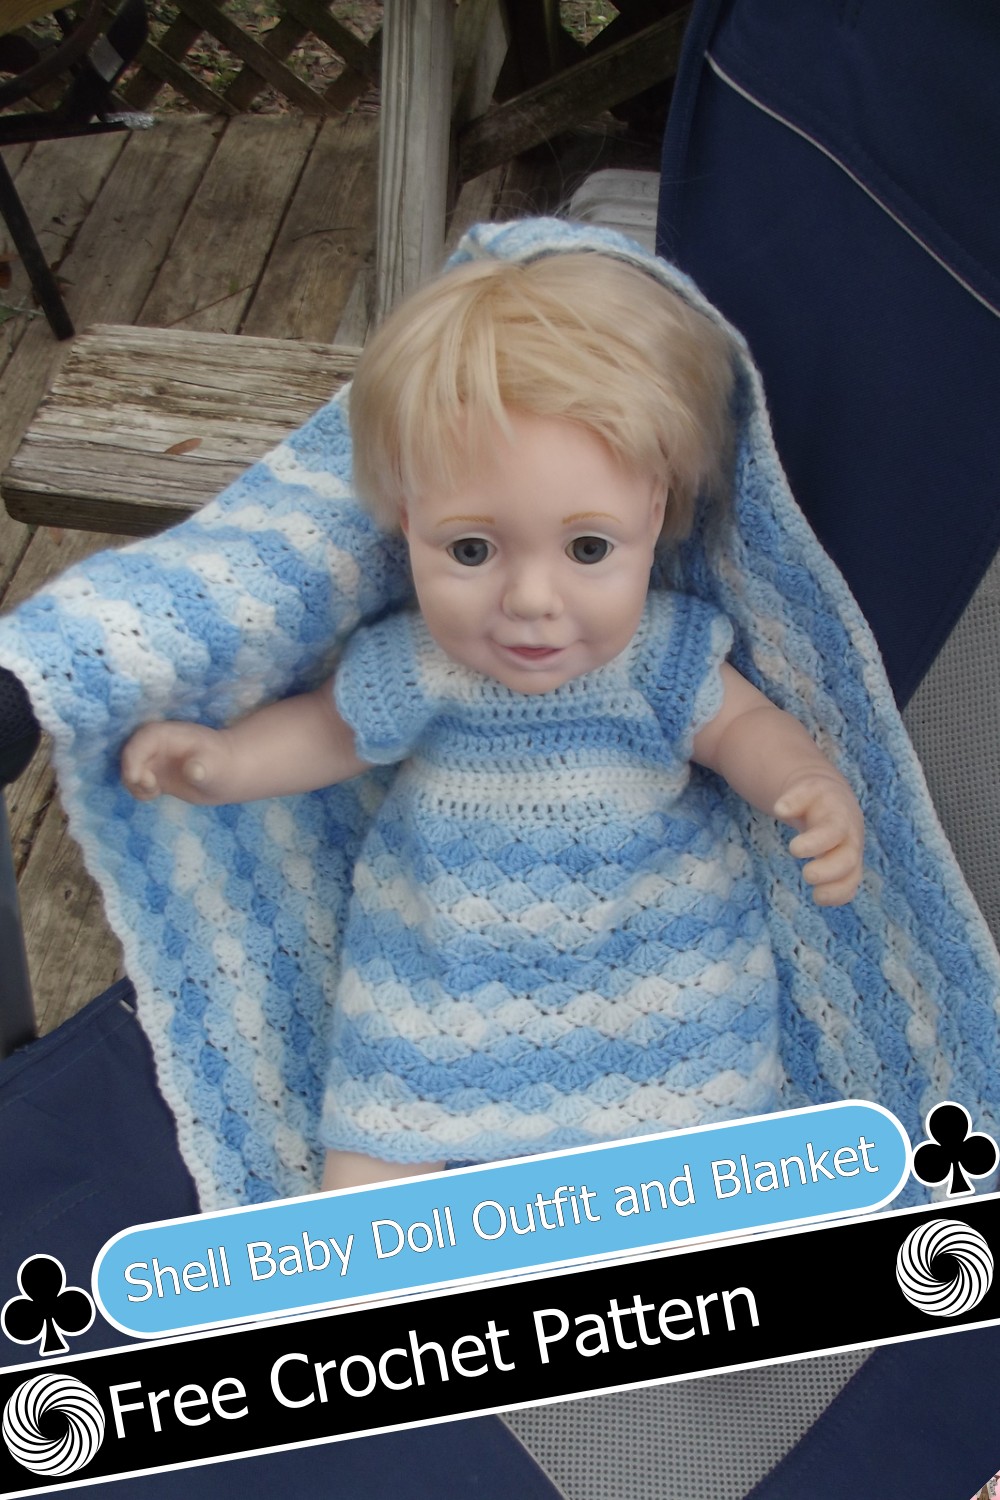 Shell Baby Doll Outfit and Blanket